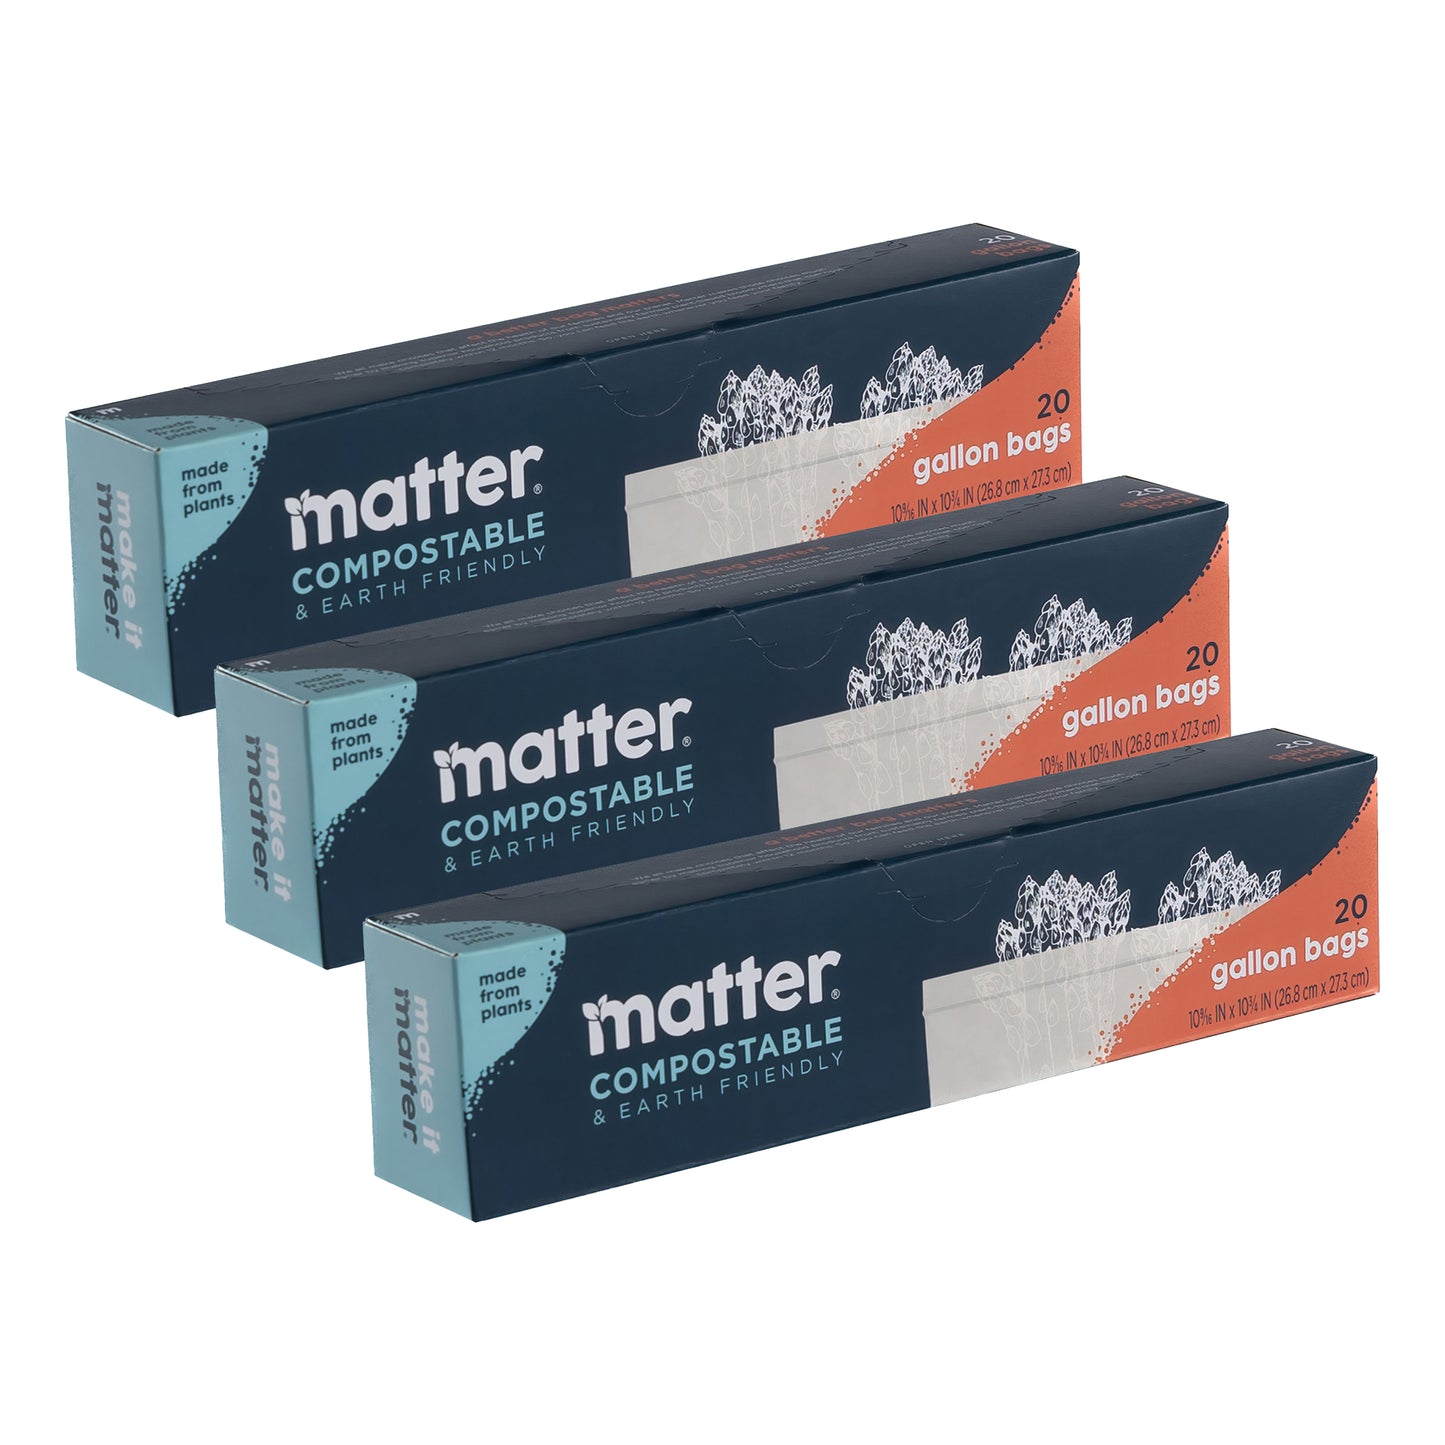 Matter Compostable Gallon Bags - 3 Pack